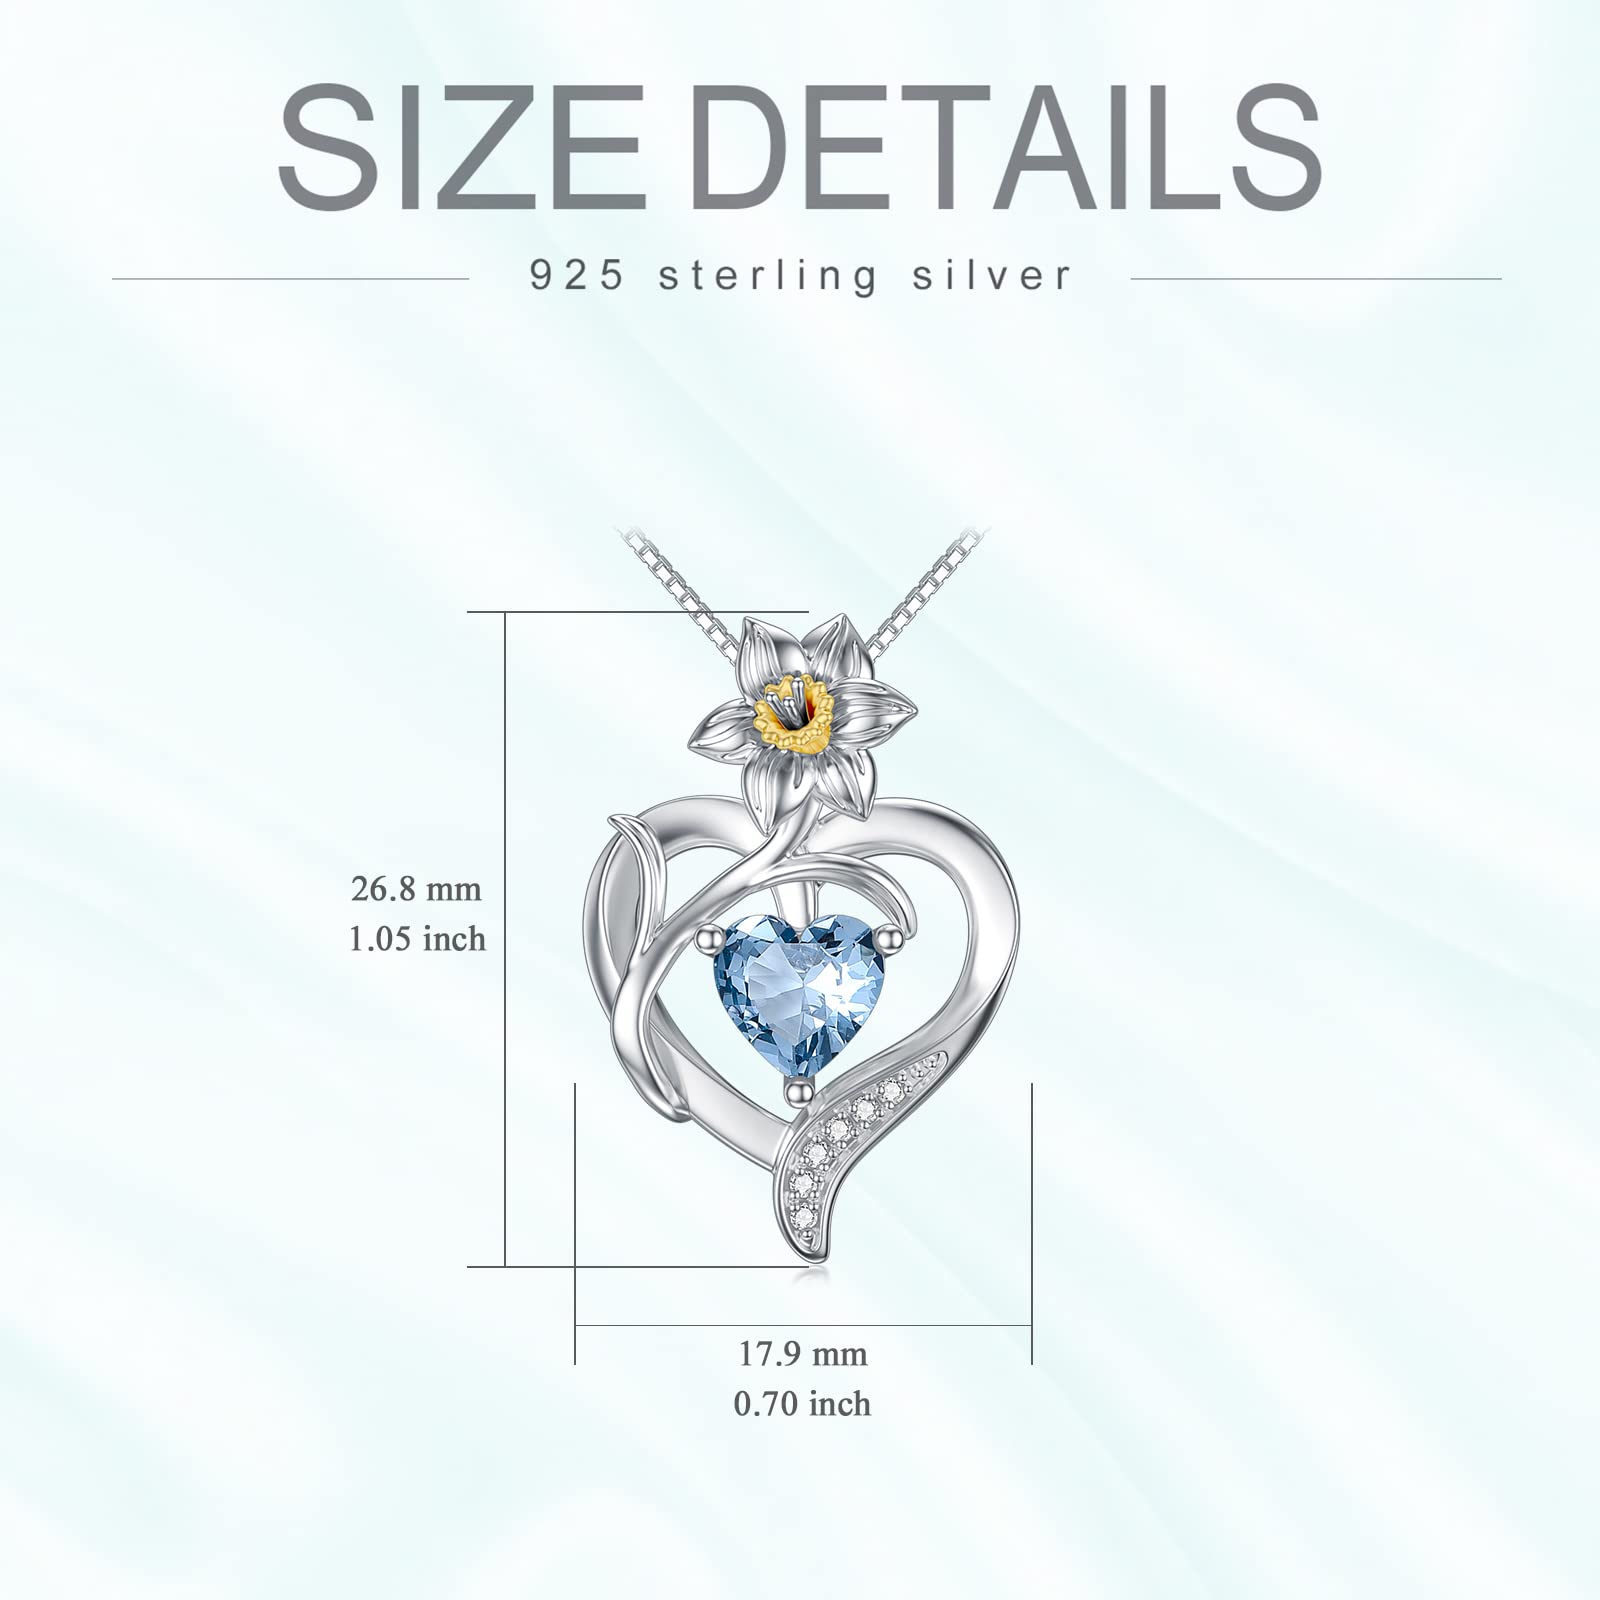 TOUPOP 925 Sterling Silver Birth Month Flower Floral Heart Pendant Necklace with Birthstone Birthday Graduation Jewelry for Women Girls